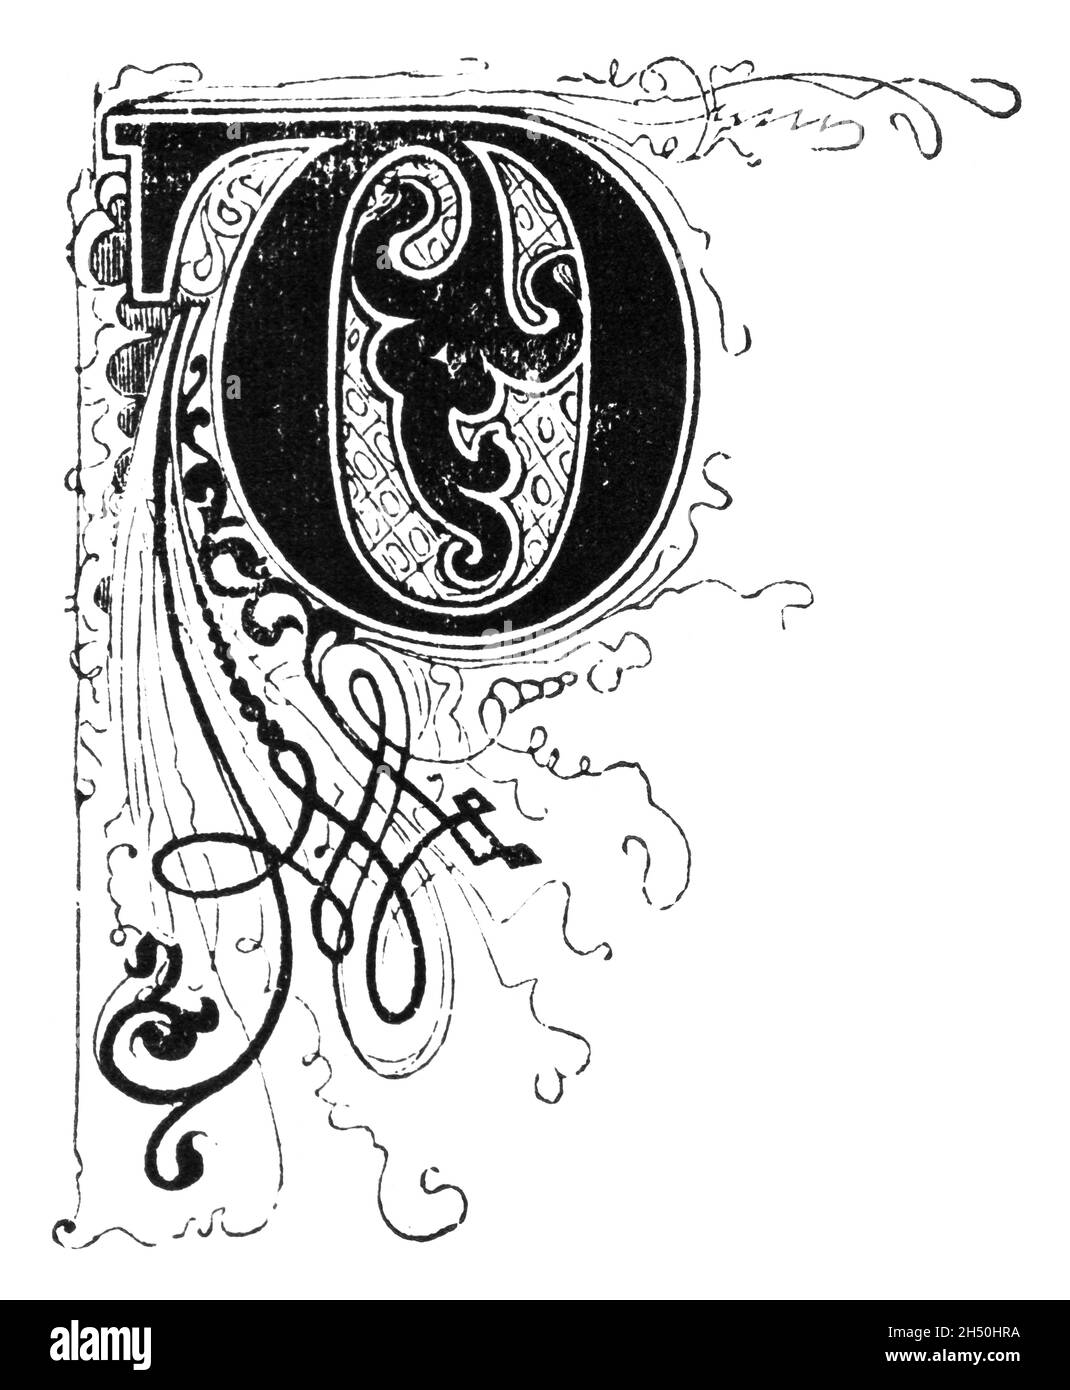 Capital Decorative Ornate Letter D, With Floral Embellishment or Ornament. Vintage Antique Drawing Stock Photo